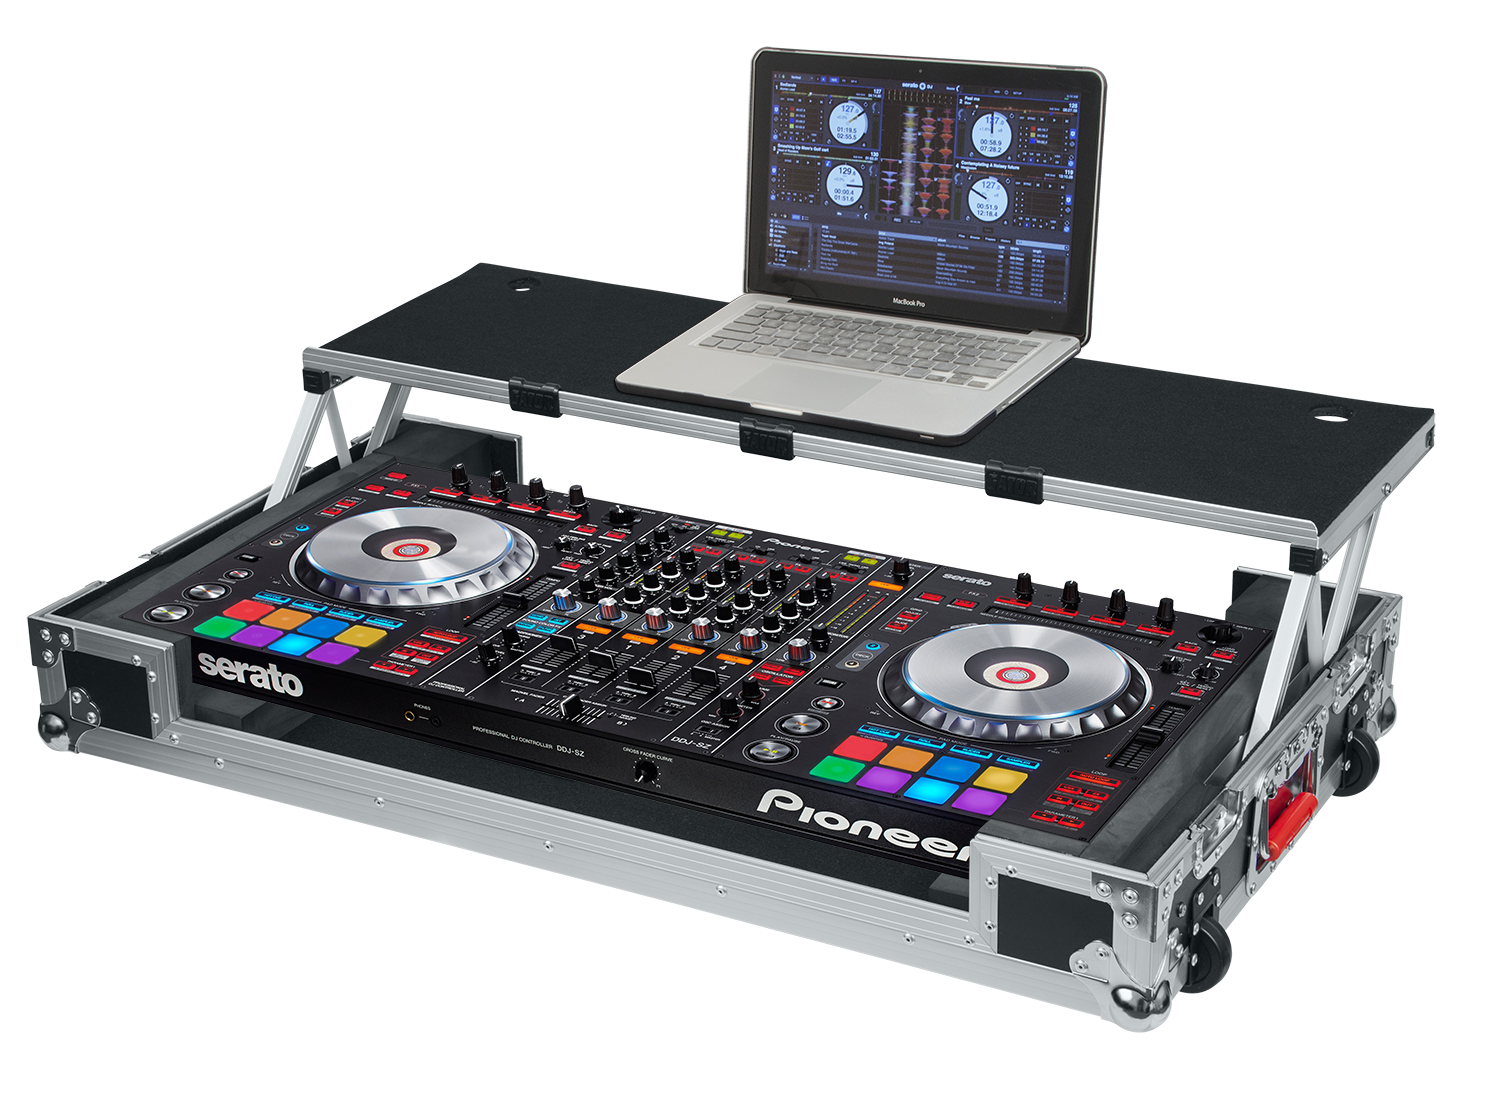 G-TOUR DSP case for Pioneer DDJSZ controller